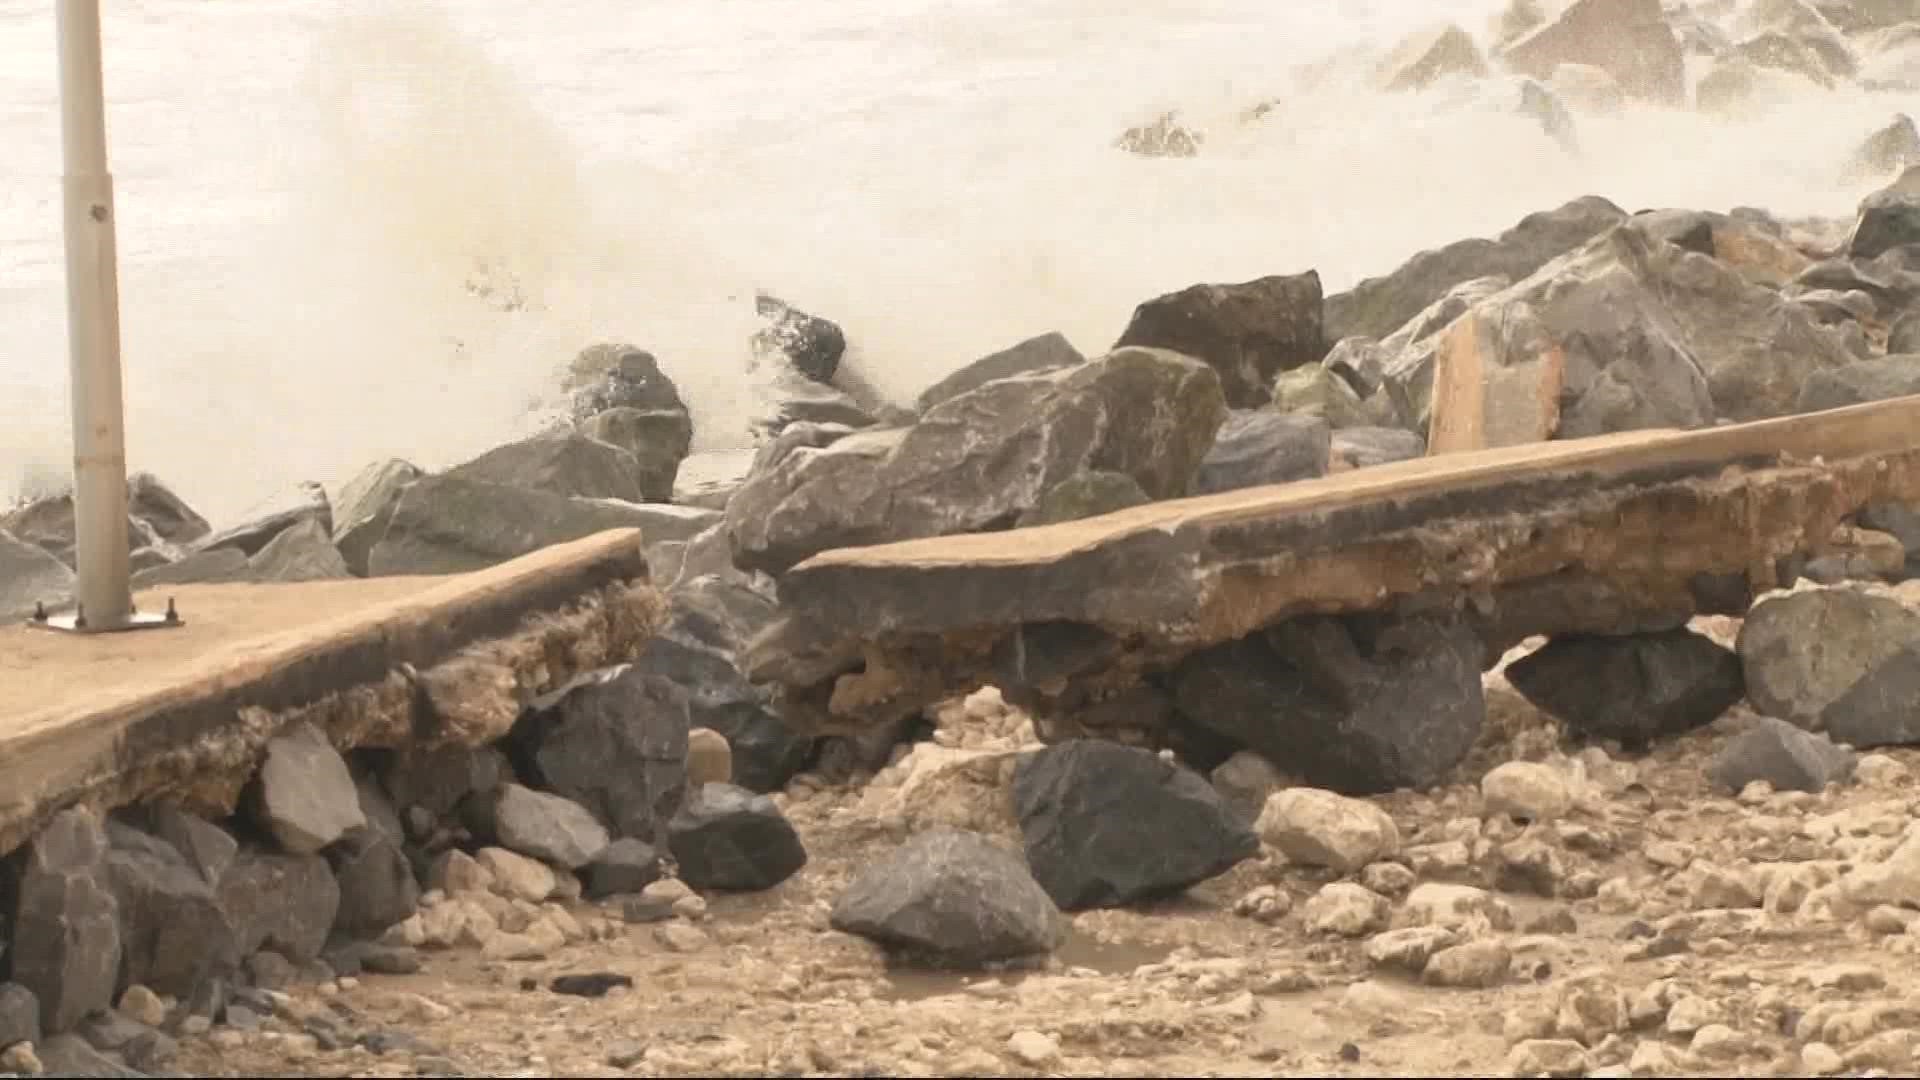 Beach access in Crescent Beach is an obstacle course littered with debris.